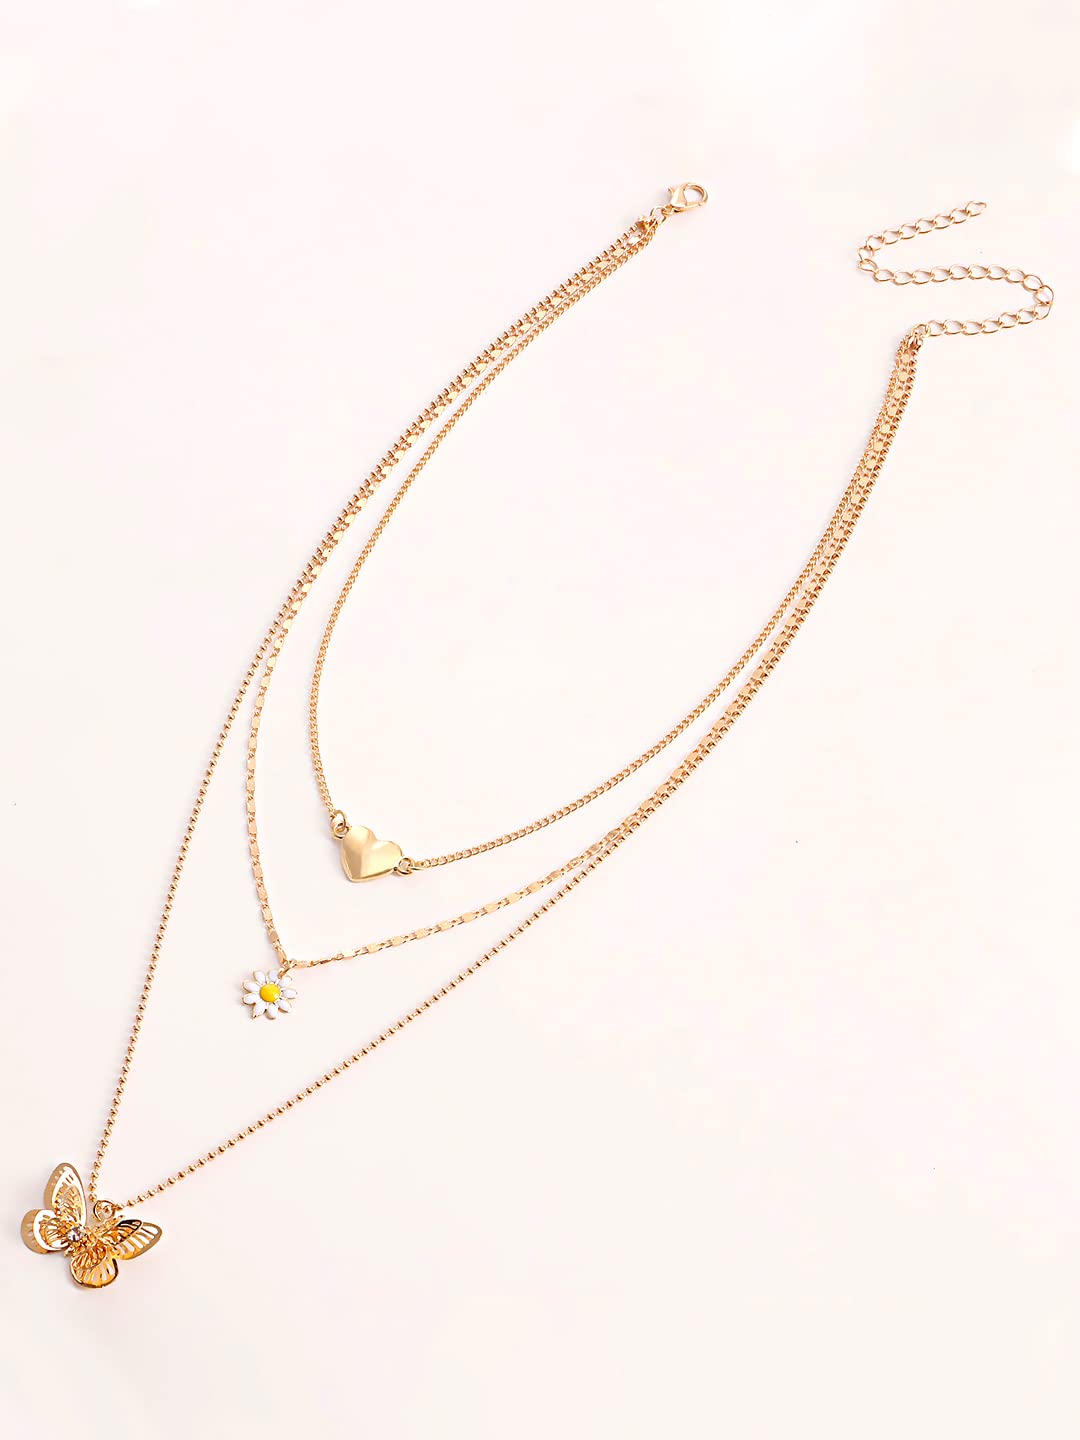 Yellow Chimes Necklace For Women Layered Gold Tone Heart Shape